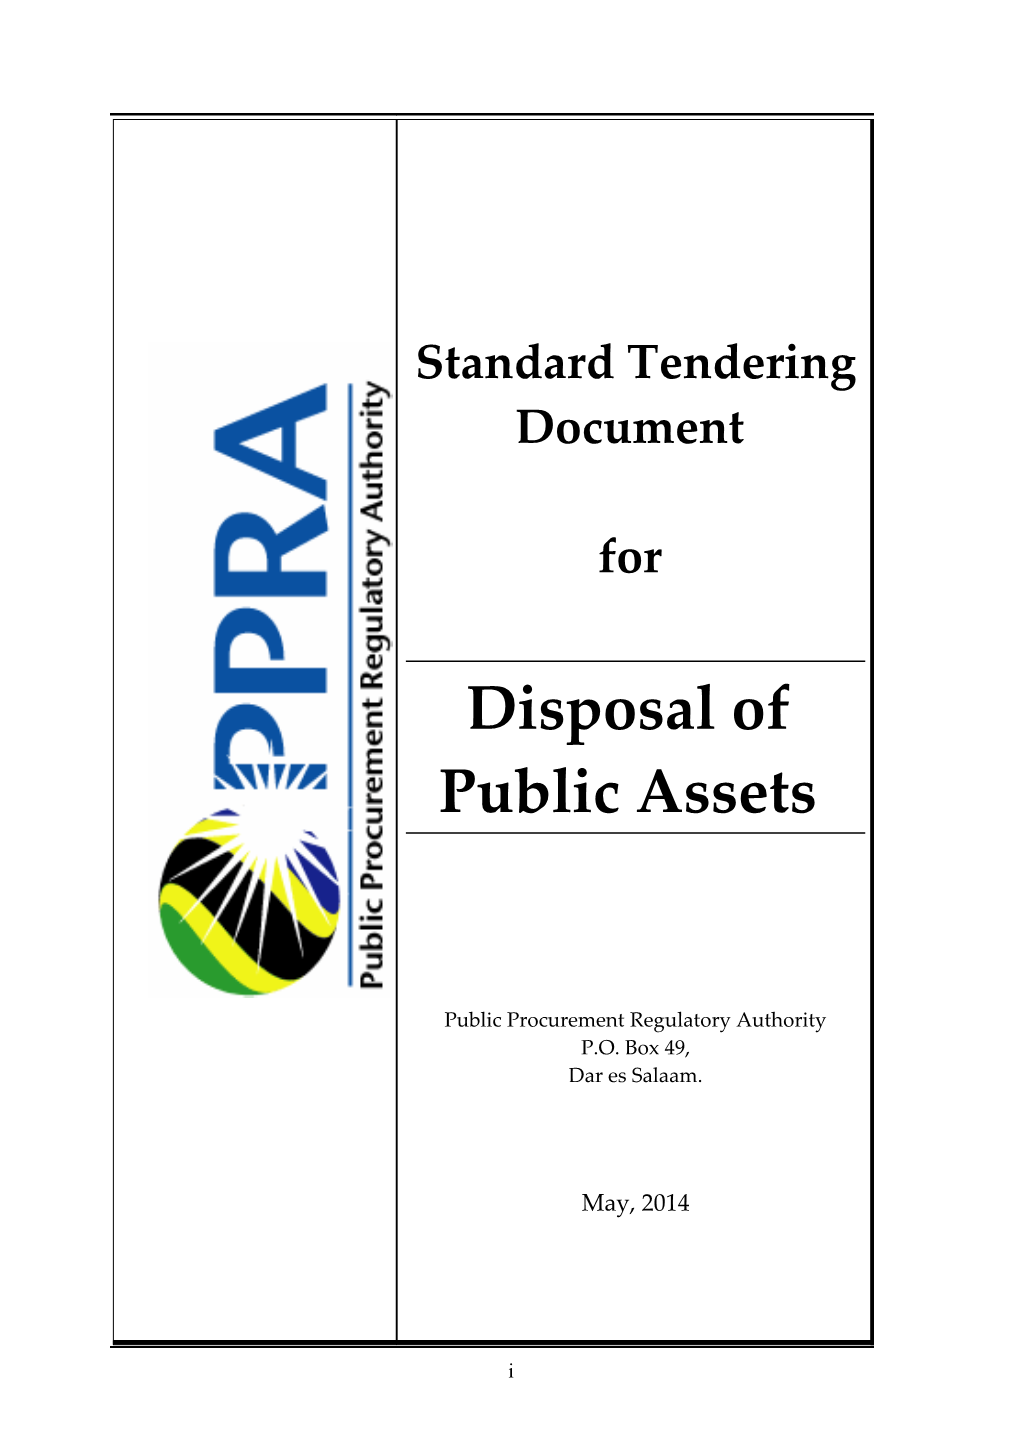 Disposal of Public Assets by the Tender Is Carried out in Accordance with the Public Procurement